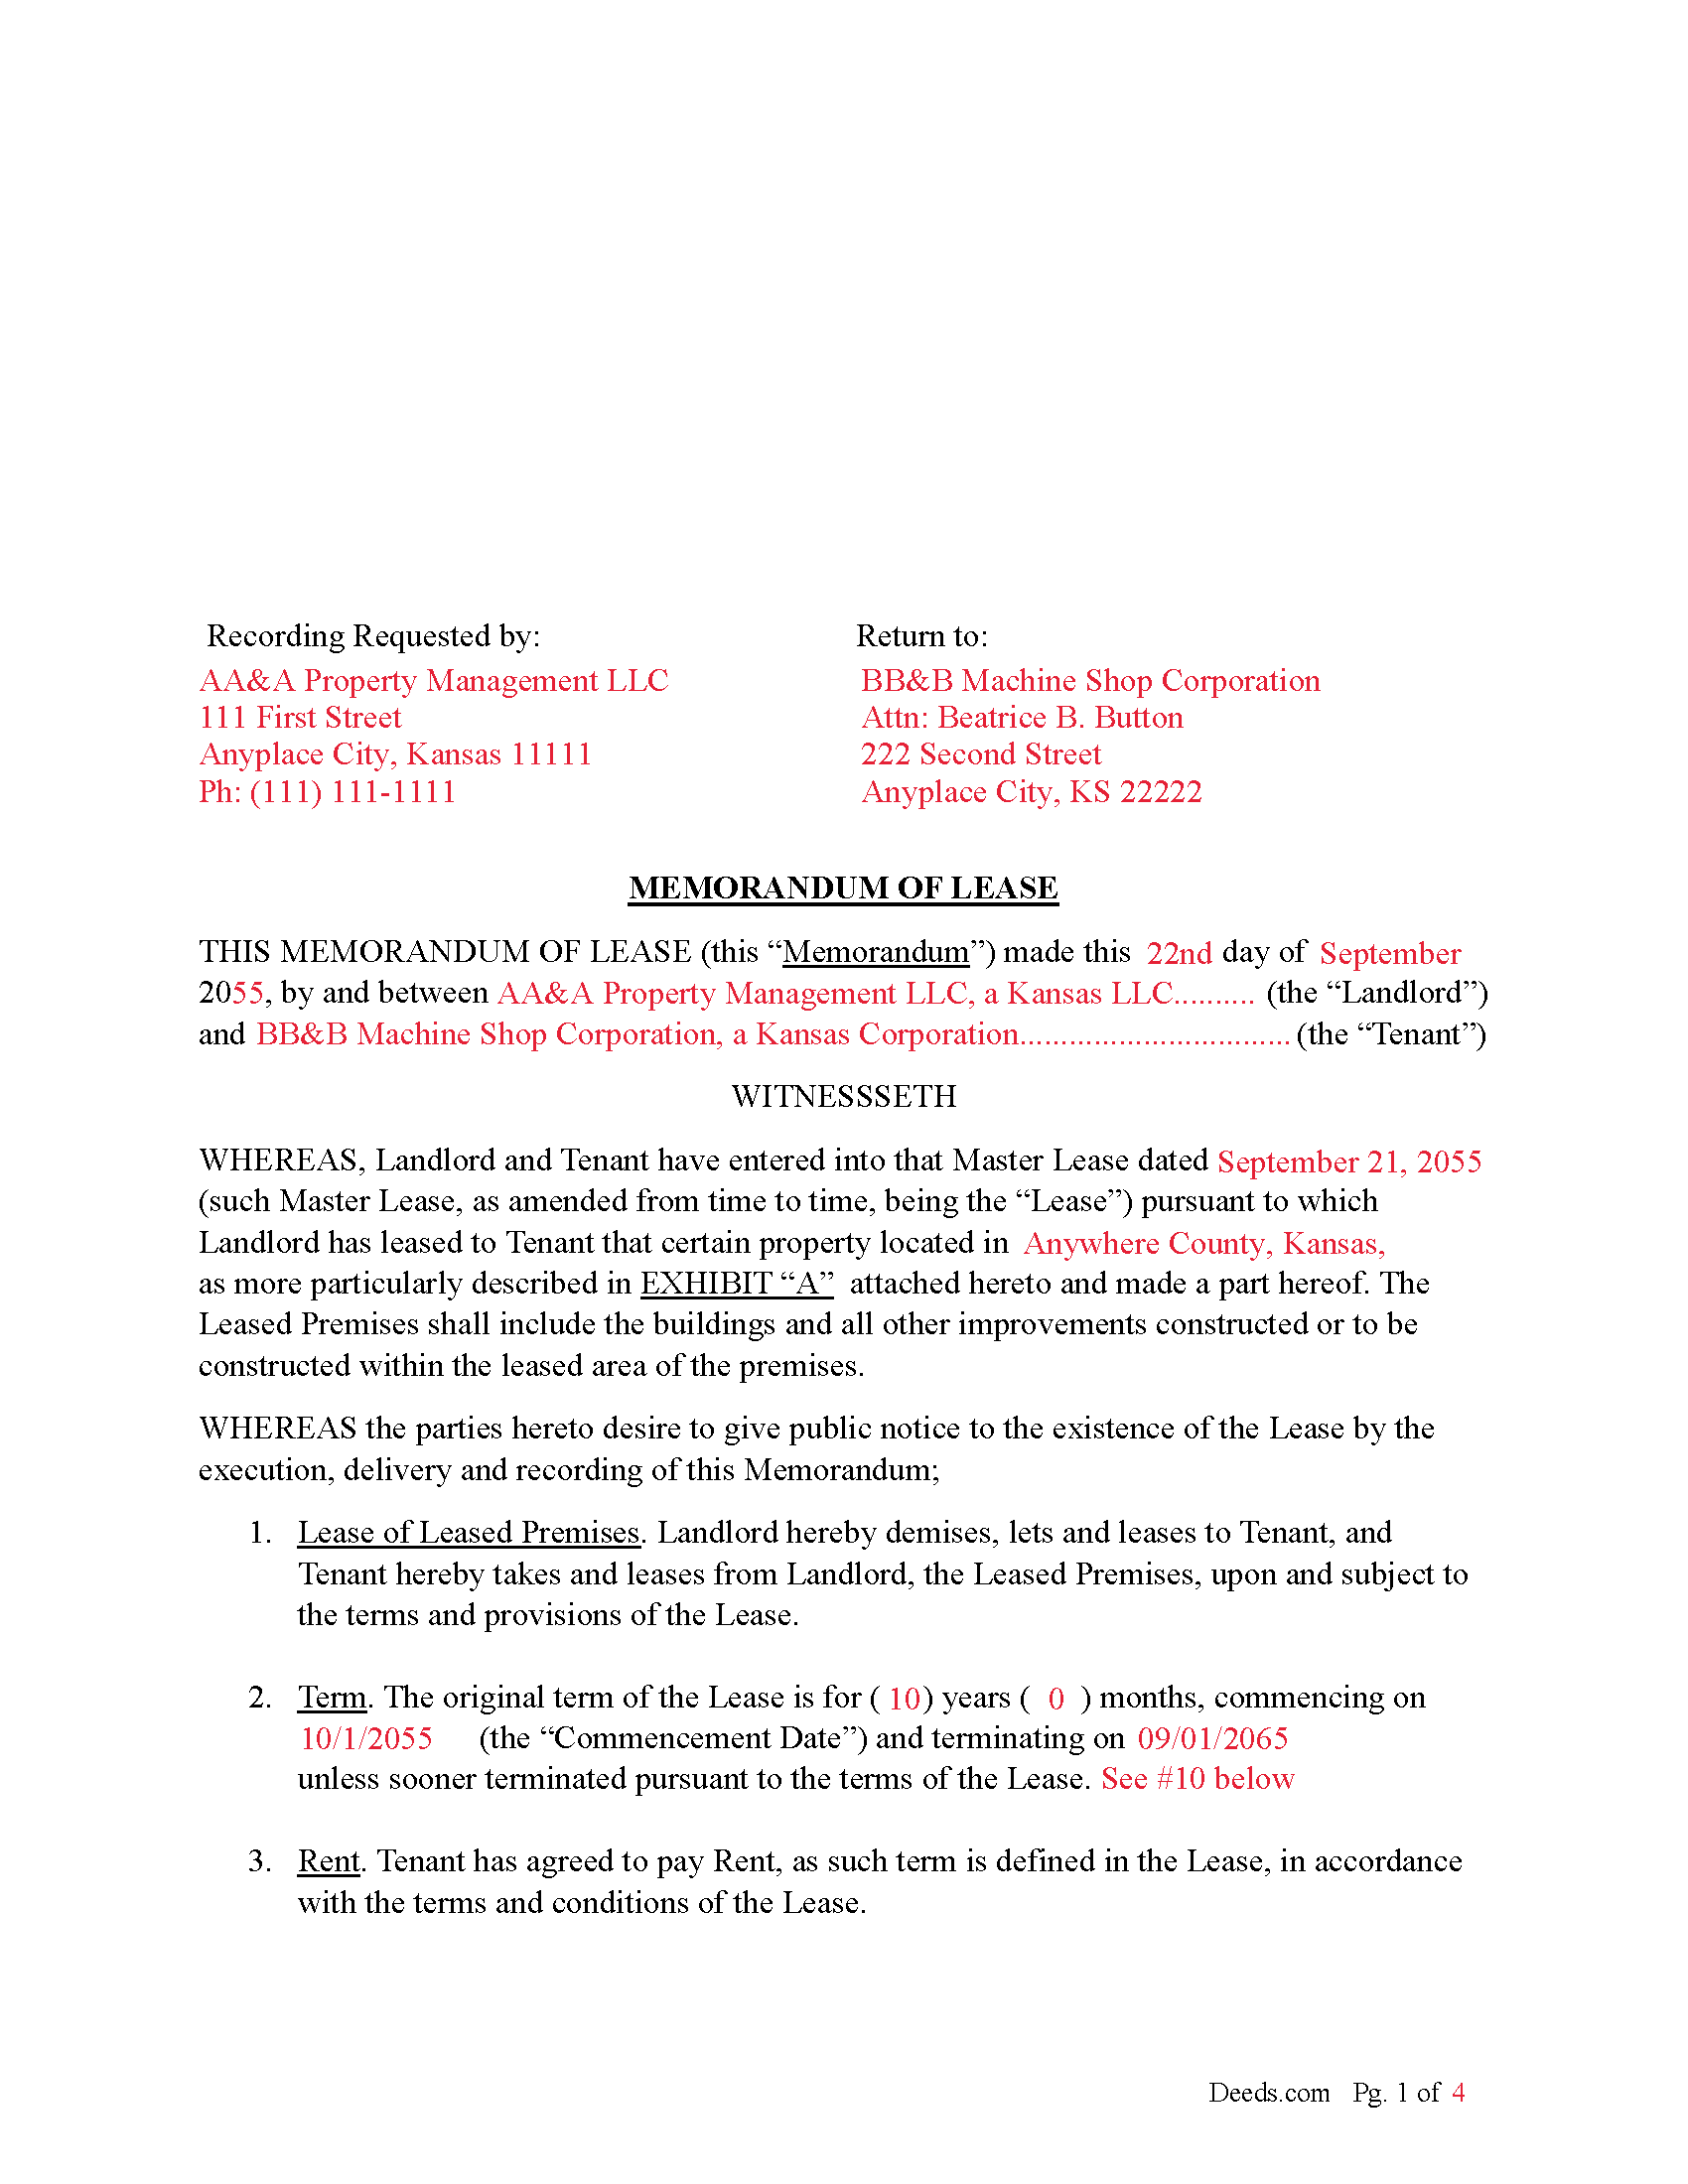 Completed Example of the Memorandum of Lease Document